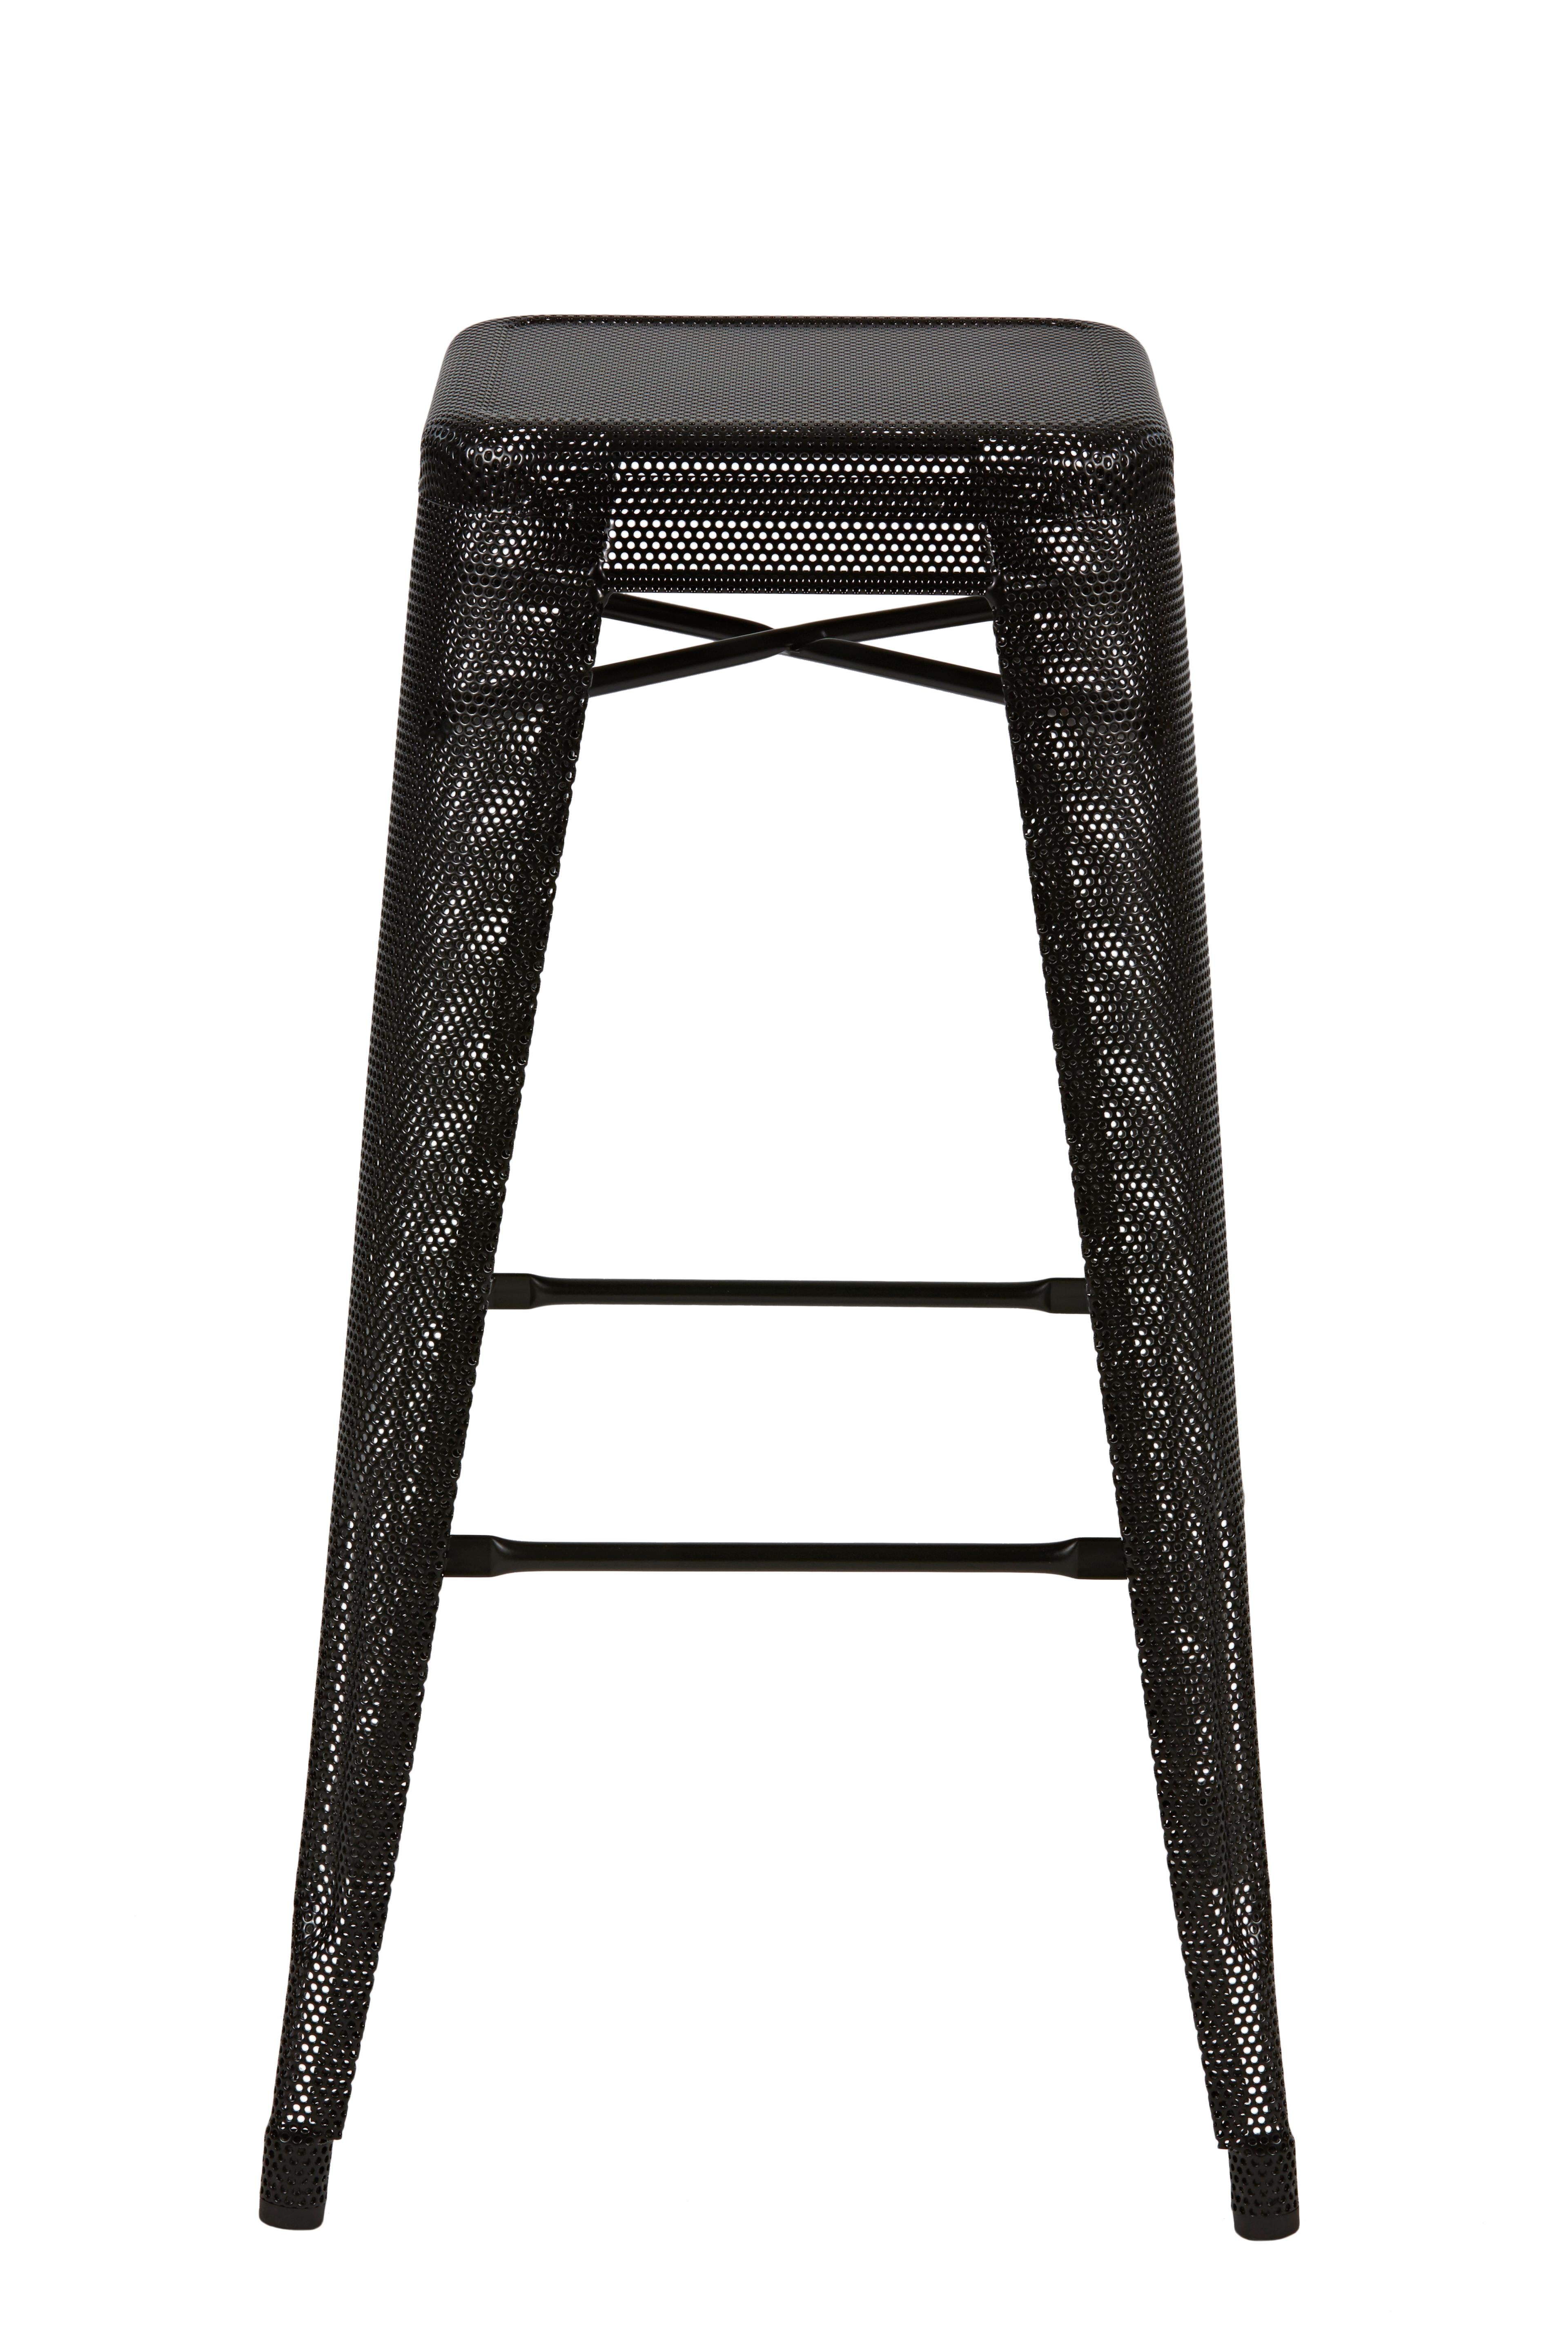 For Sale: Black (Noir) H Stool Perforated 75 in Essential Colors by Chantal Andriot and Tolix